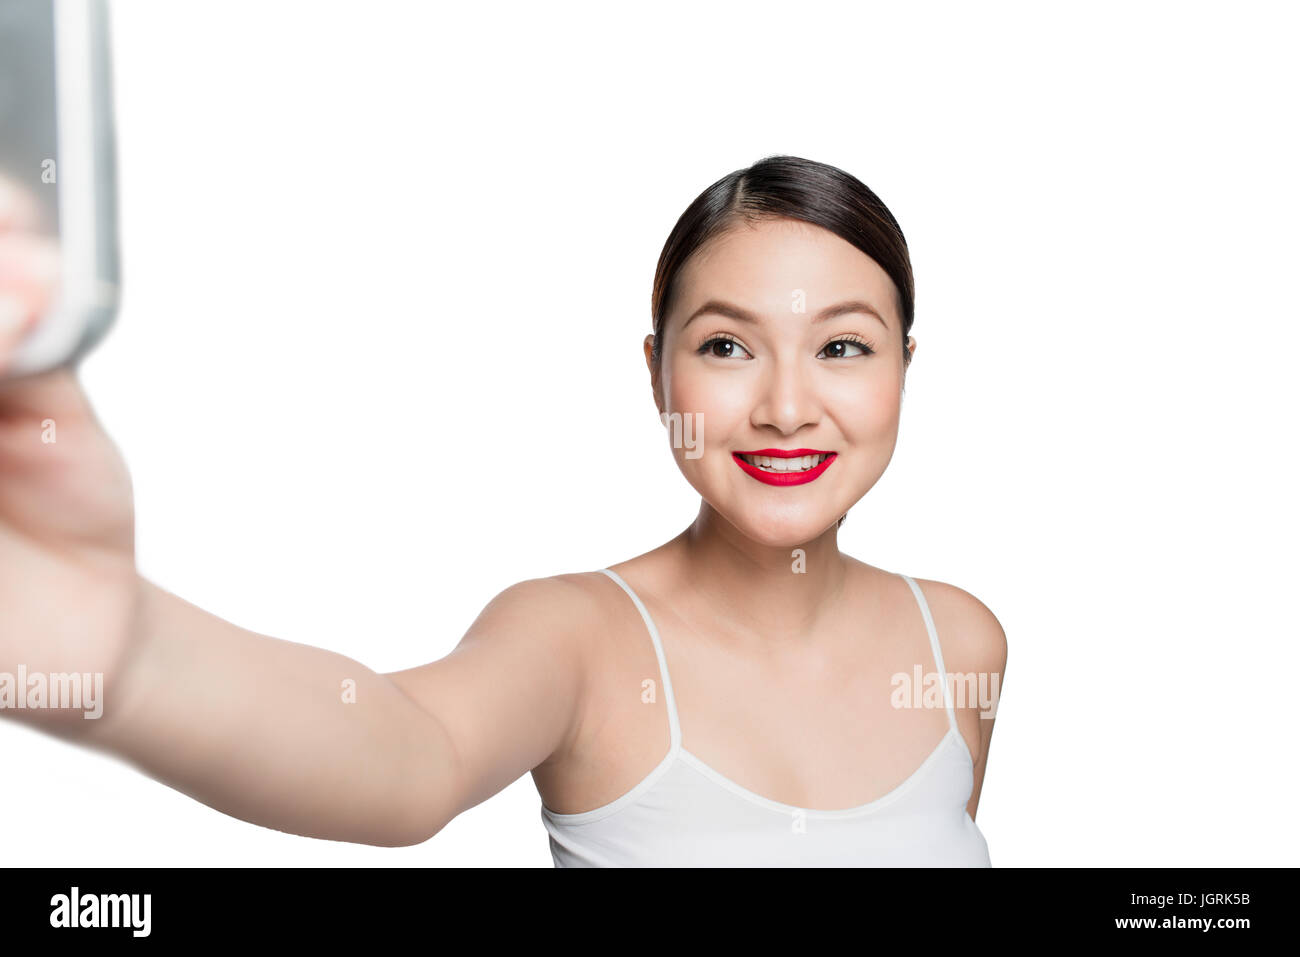 Beautiful asian woman with retro makeup with red lips taking selfie photo isolated on white background. Stock Photo